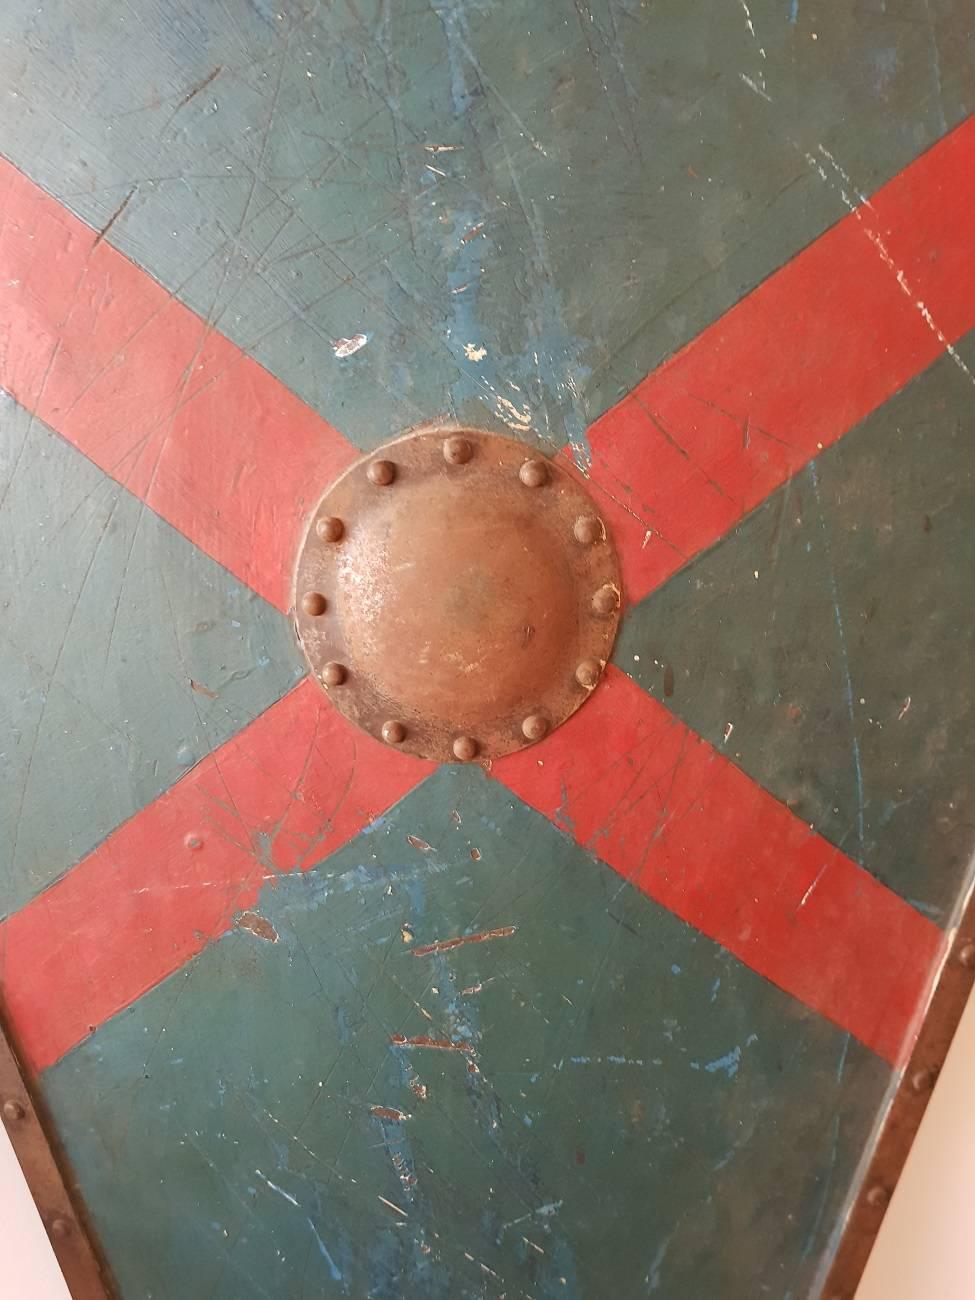 Medieval style metal kite shield model from circa 1900 to a sample that were made in the 10th to the 13th century, decorated with a red X on blue background.

It weighs around the 7 kilo's and the measurements are:
Depth 5.5 cm/ 2.1 inch.
Width